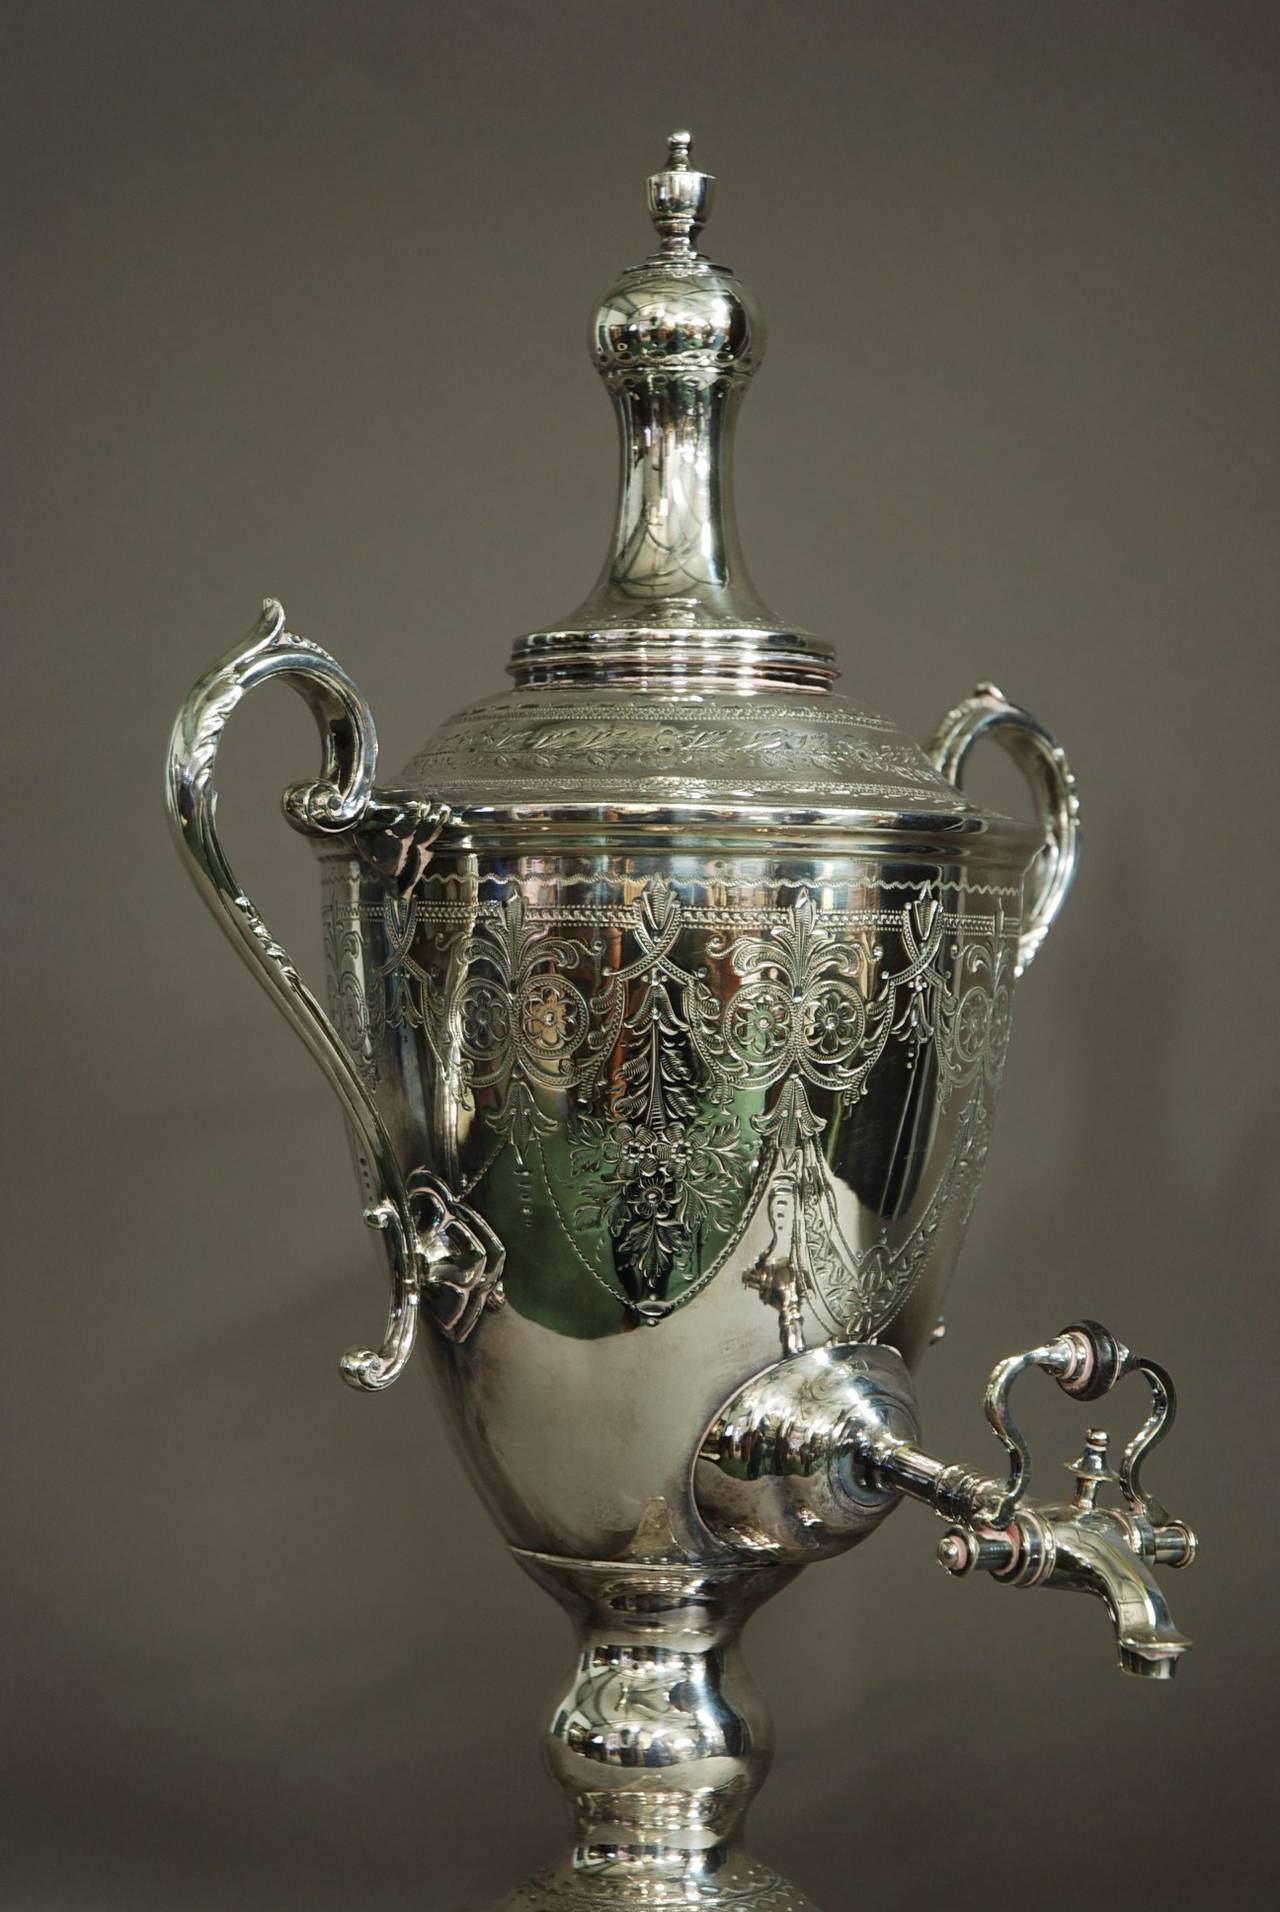 A good quality late 19th century silver plate vase shaped tea urn.

The main body of the urn is of Classical vase shaped design.

The piece has scrolling foliage handles and is decorated with elaborate Classical engraving of floral and foliage